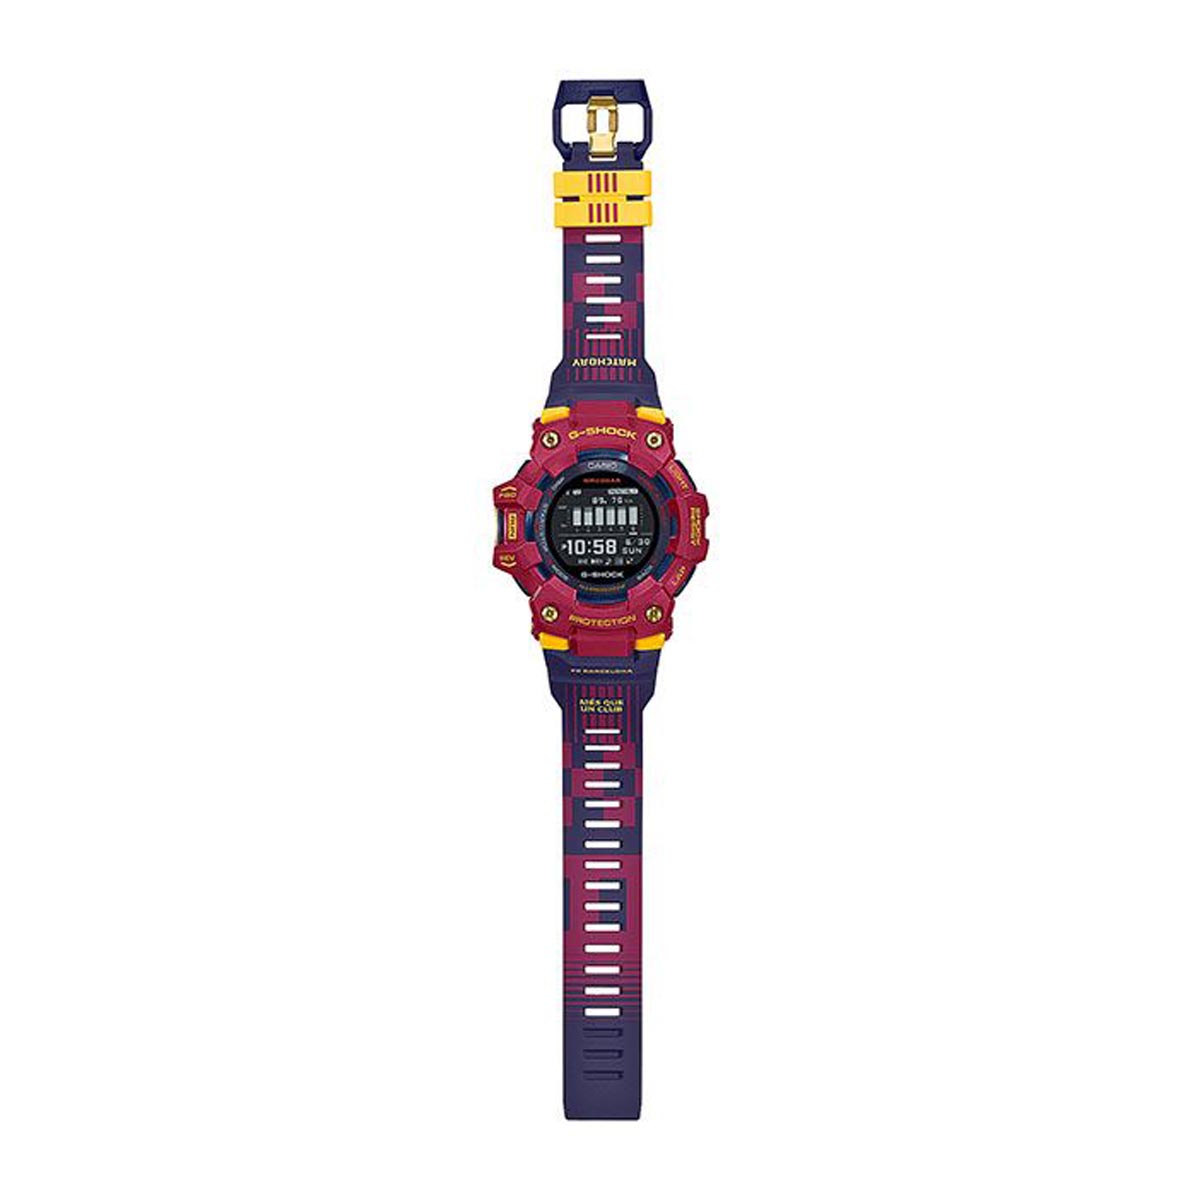 G Shock Limited Edition Barcelona Mens Watch with Black Dial and Blue/Red Strap (quartz movement)